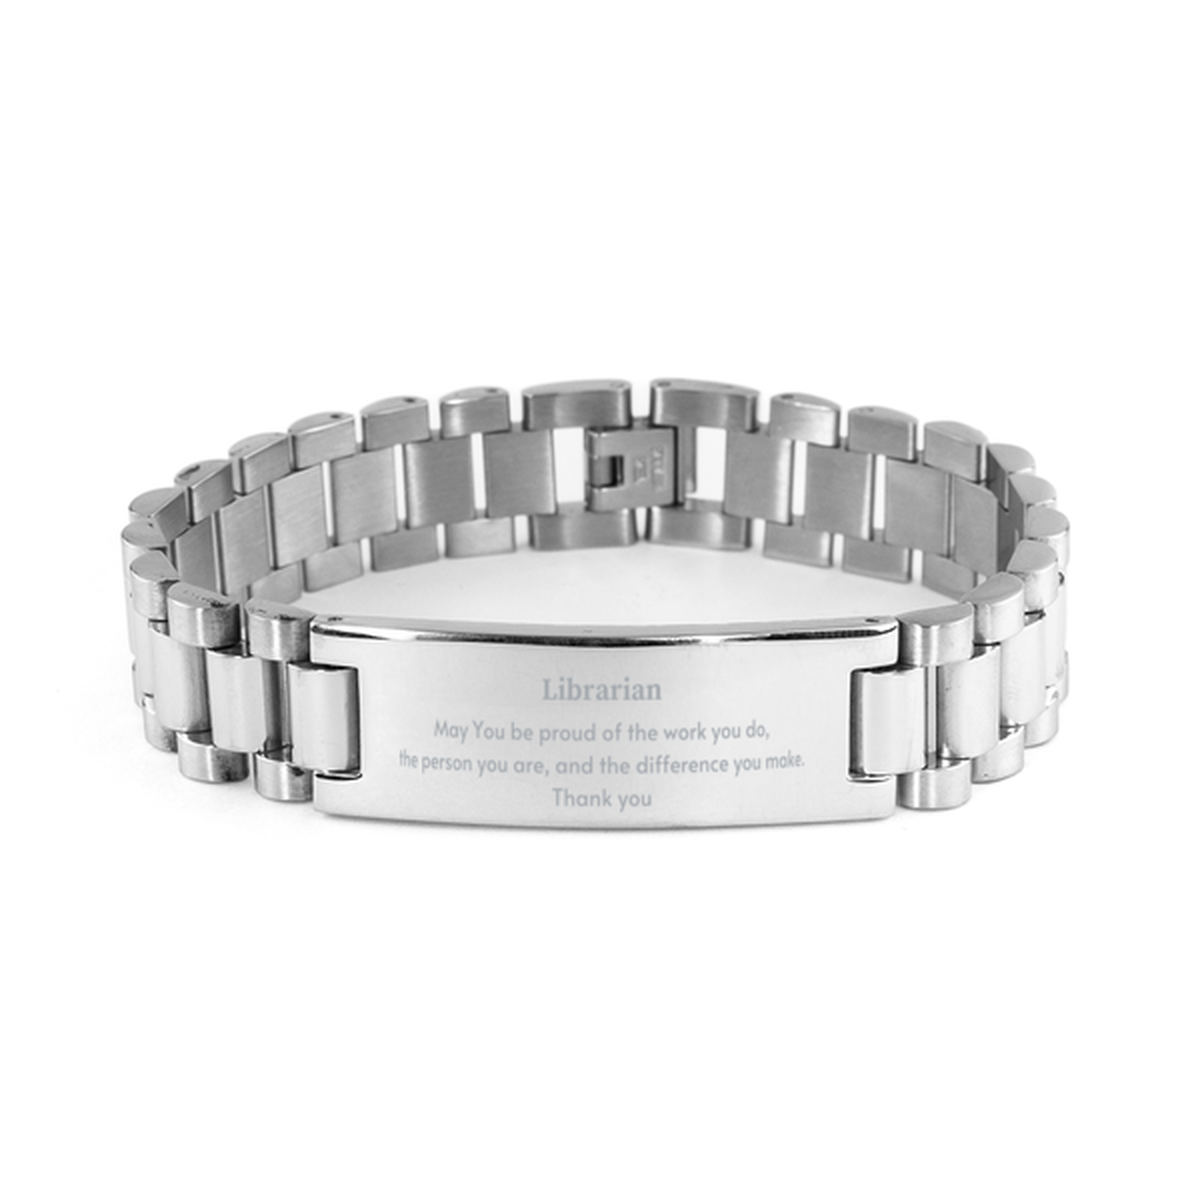 Heartwarming Ladder Stainless Steel Bracelet Retirement Coworkers Gifts for Librarian, Librarian May You be proud of the work you do, the person you are Gifts for Boss Men Women Friends